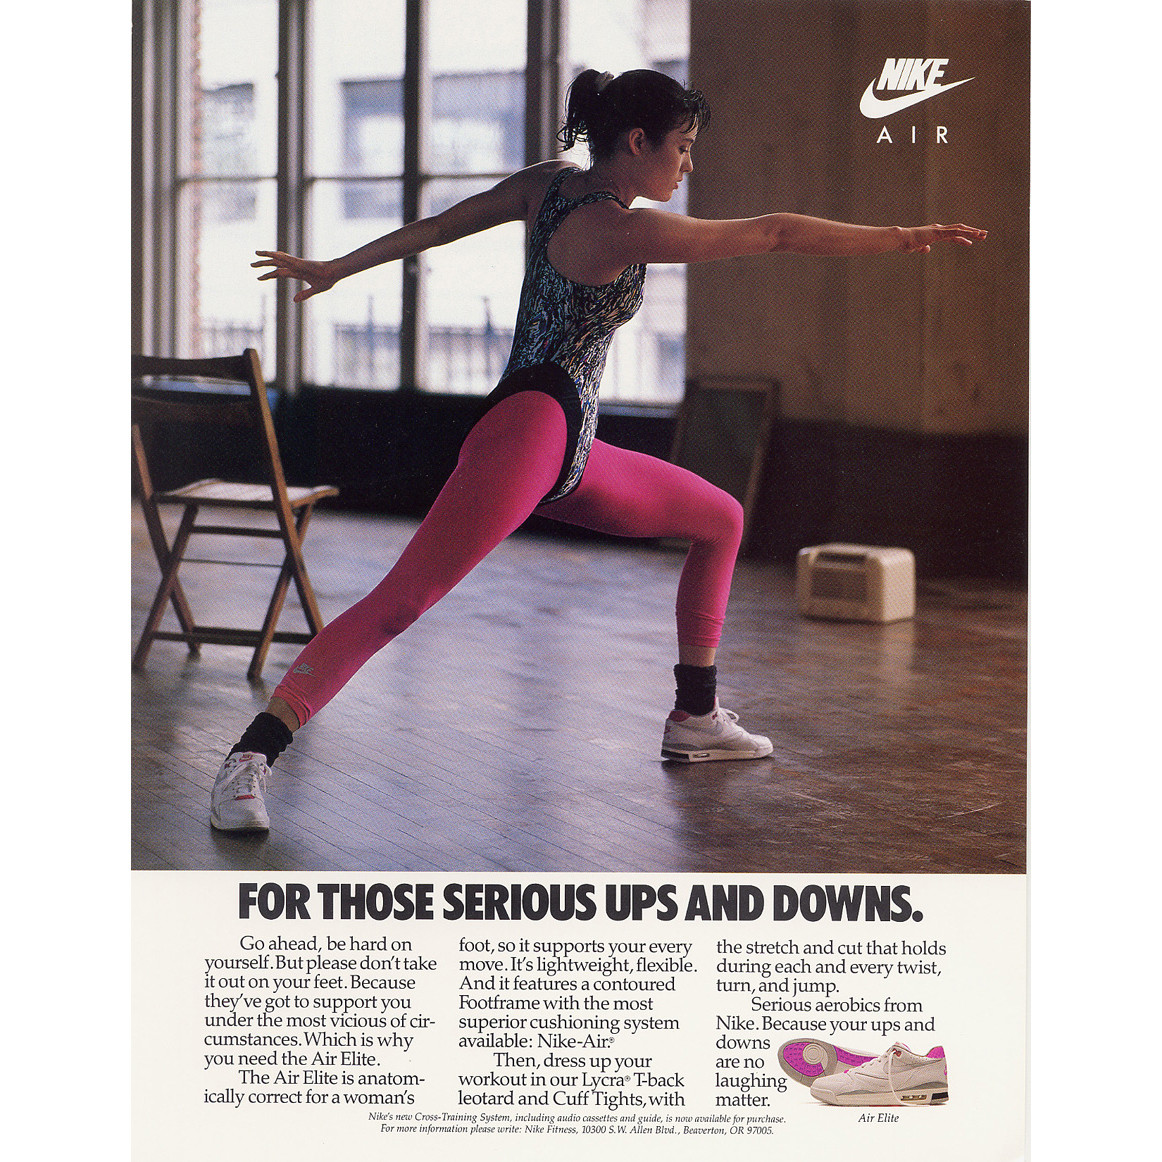 Take A At Retro Nike Ads For Women HuffPost Sports